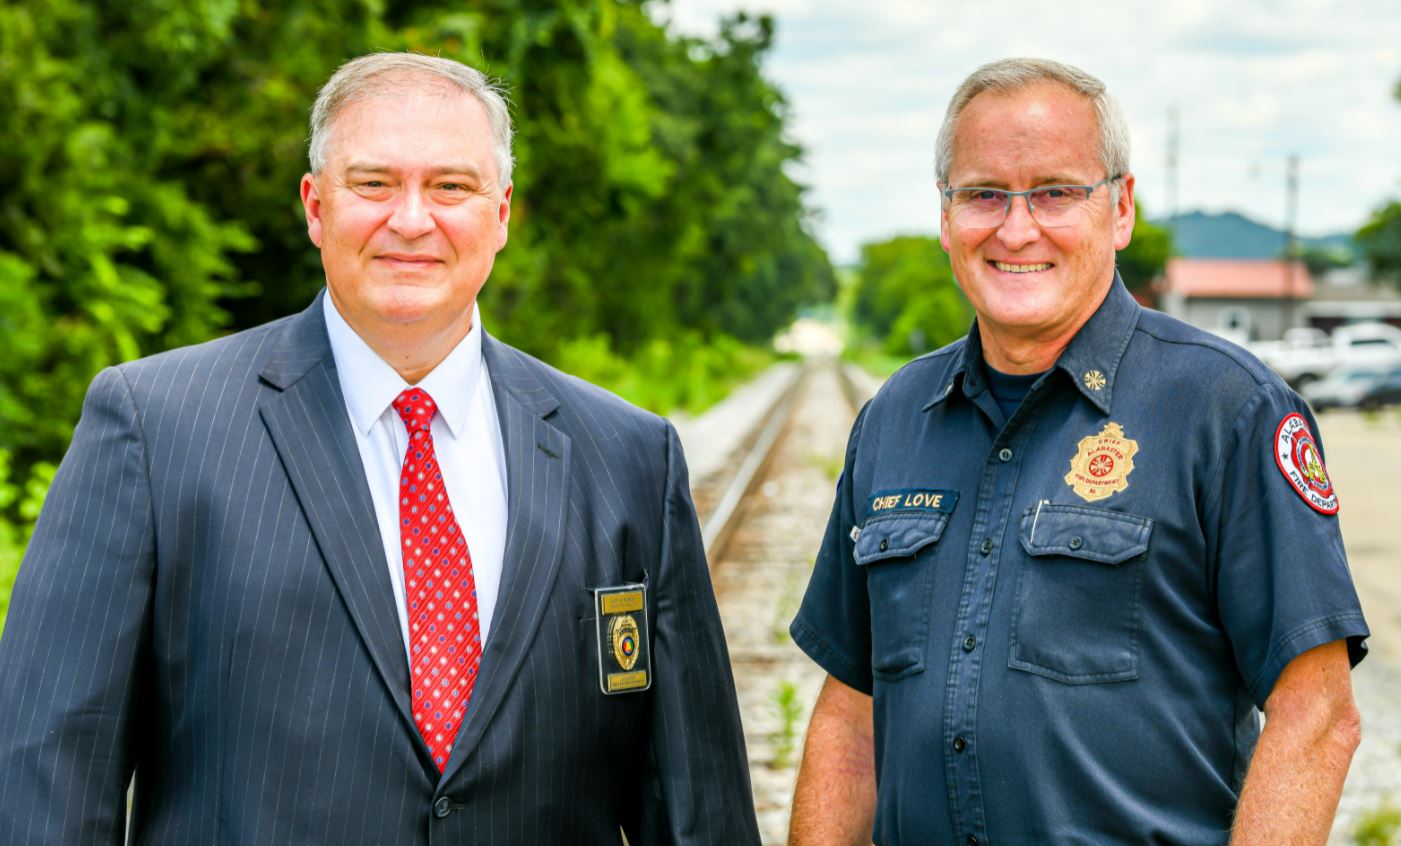 Meet Alabaster’s Police Chief and Fire Chief